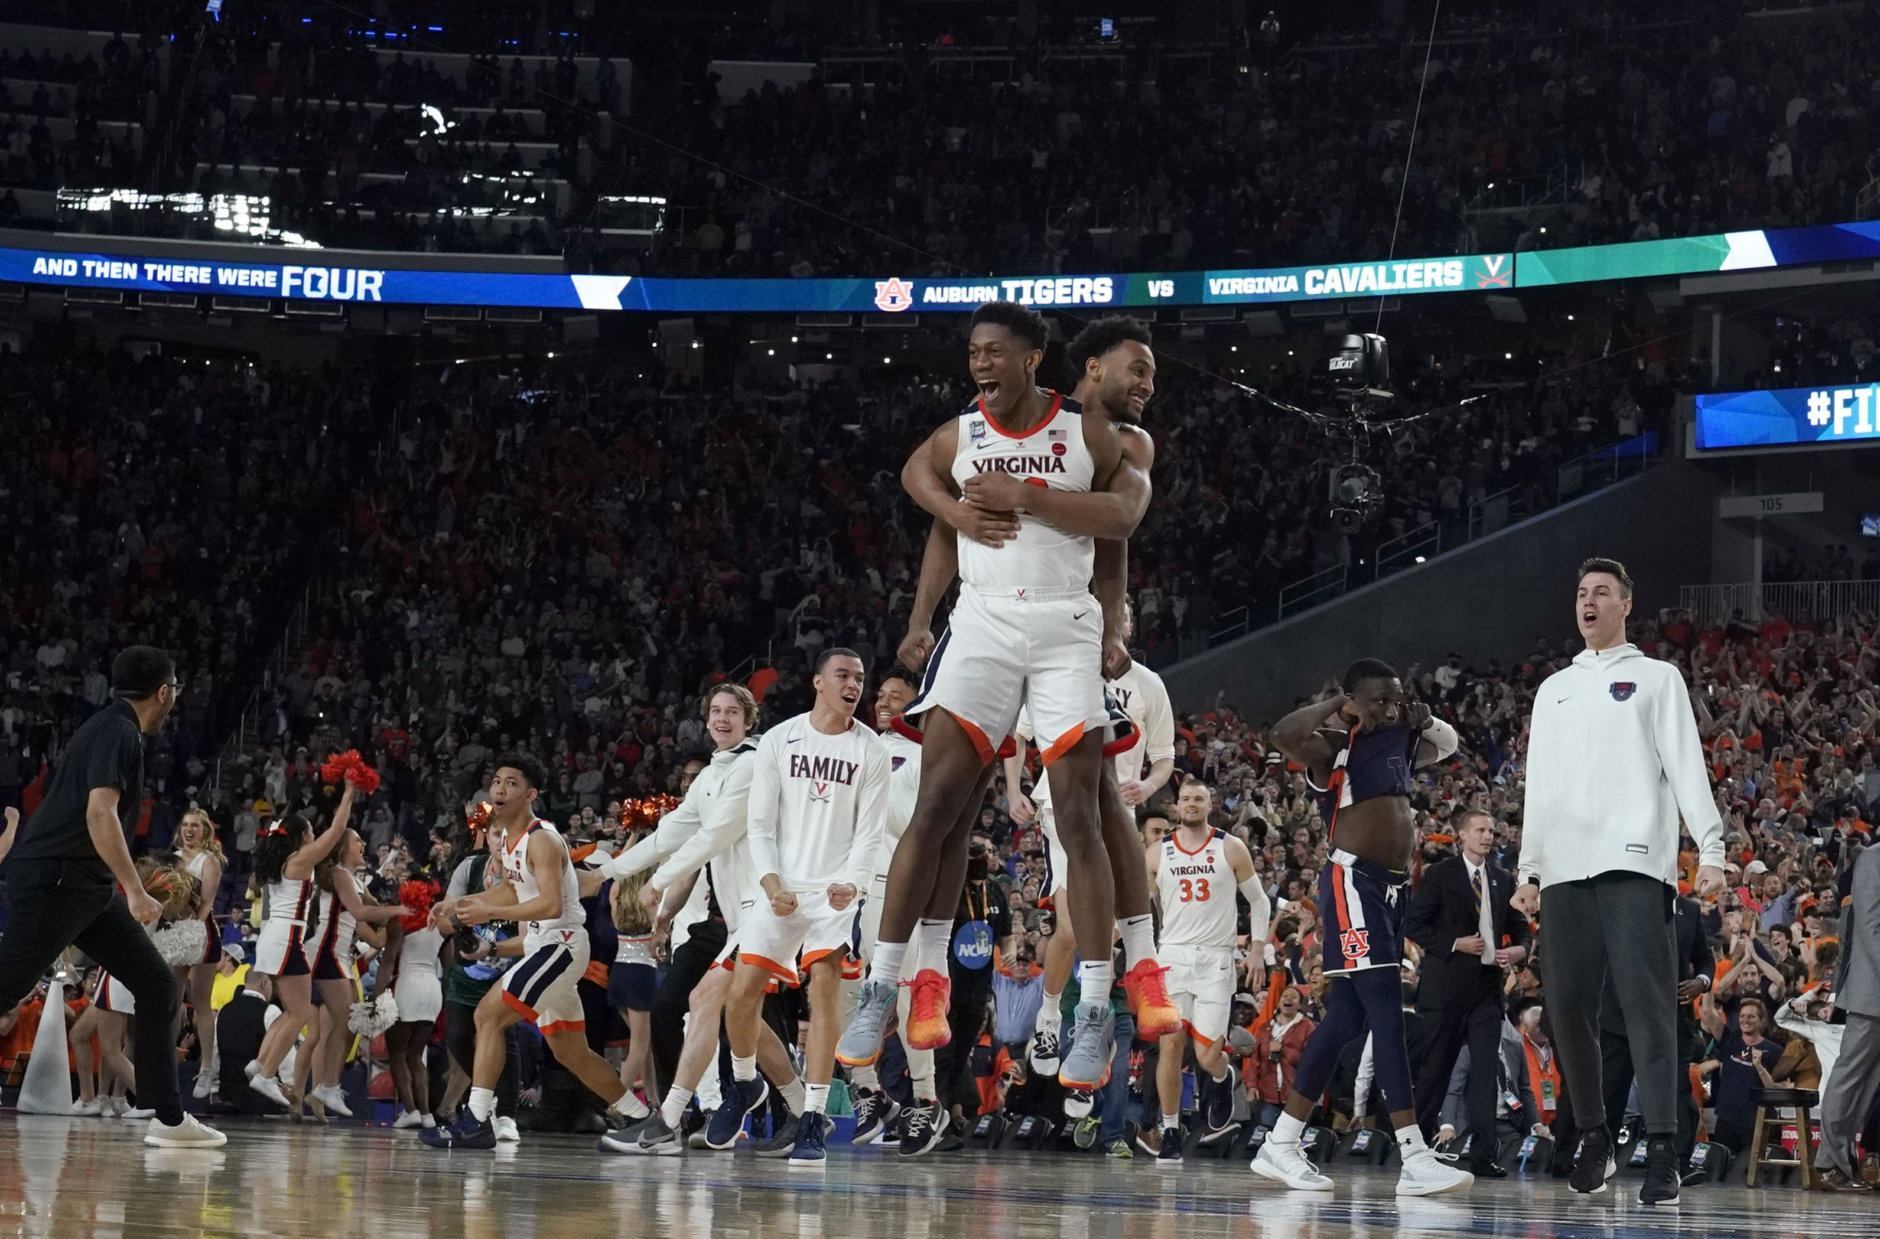 Virginia players celebrate after defeating Auburn 63-62 in the semifinals of the Final Four NCAA college basketball tournament, Saturday, April 6, 2019, in Minneapolis. (AP Photo/David J. Phillip)